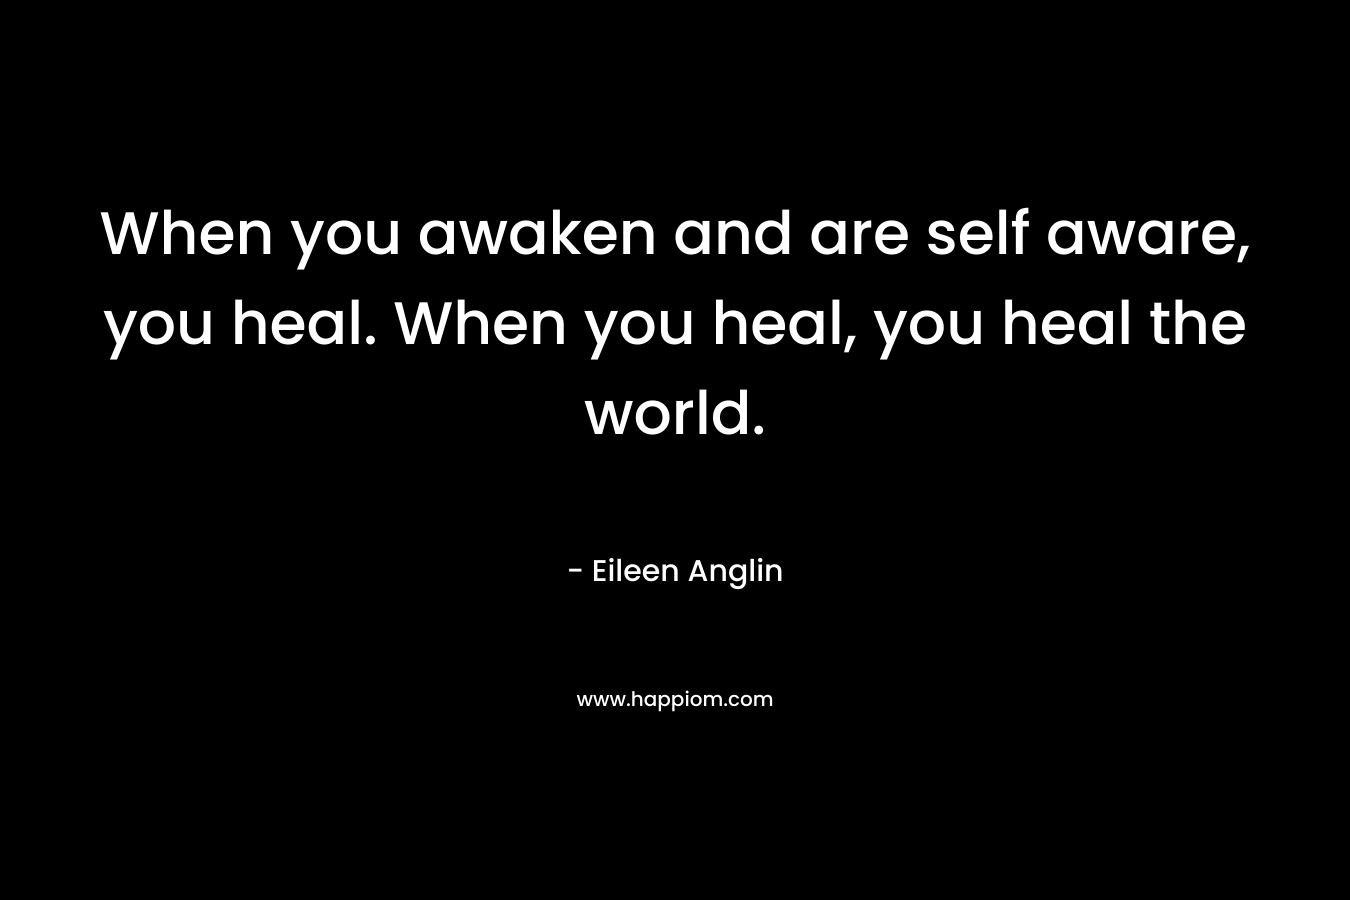 When you awaken and are self aware, you heal. When you heal, you heal the world.